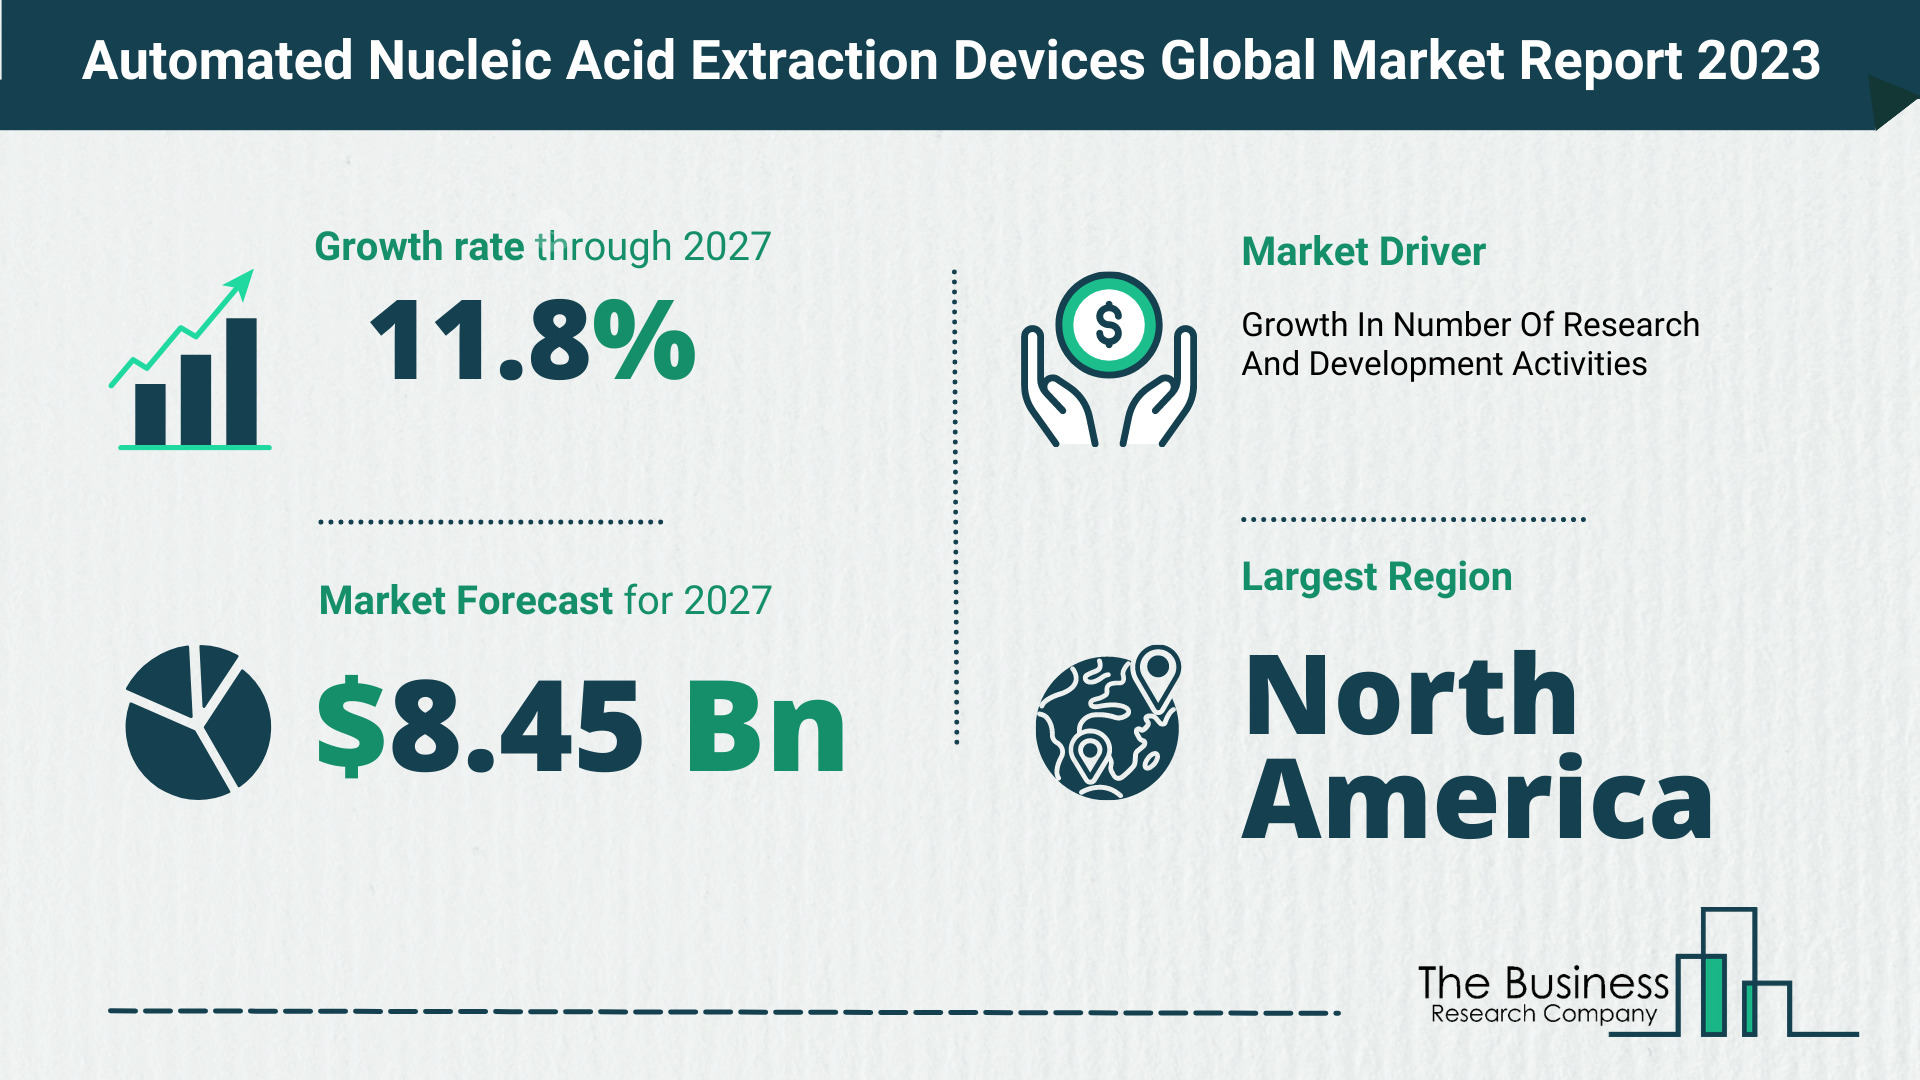 Global Automated Nucleic Acid Extraction Devices Market